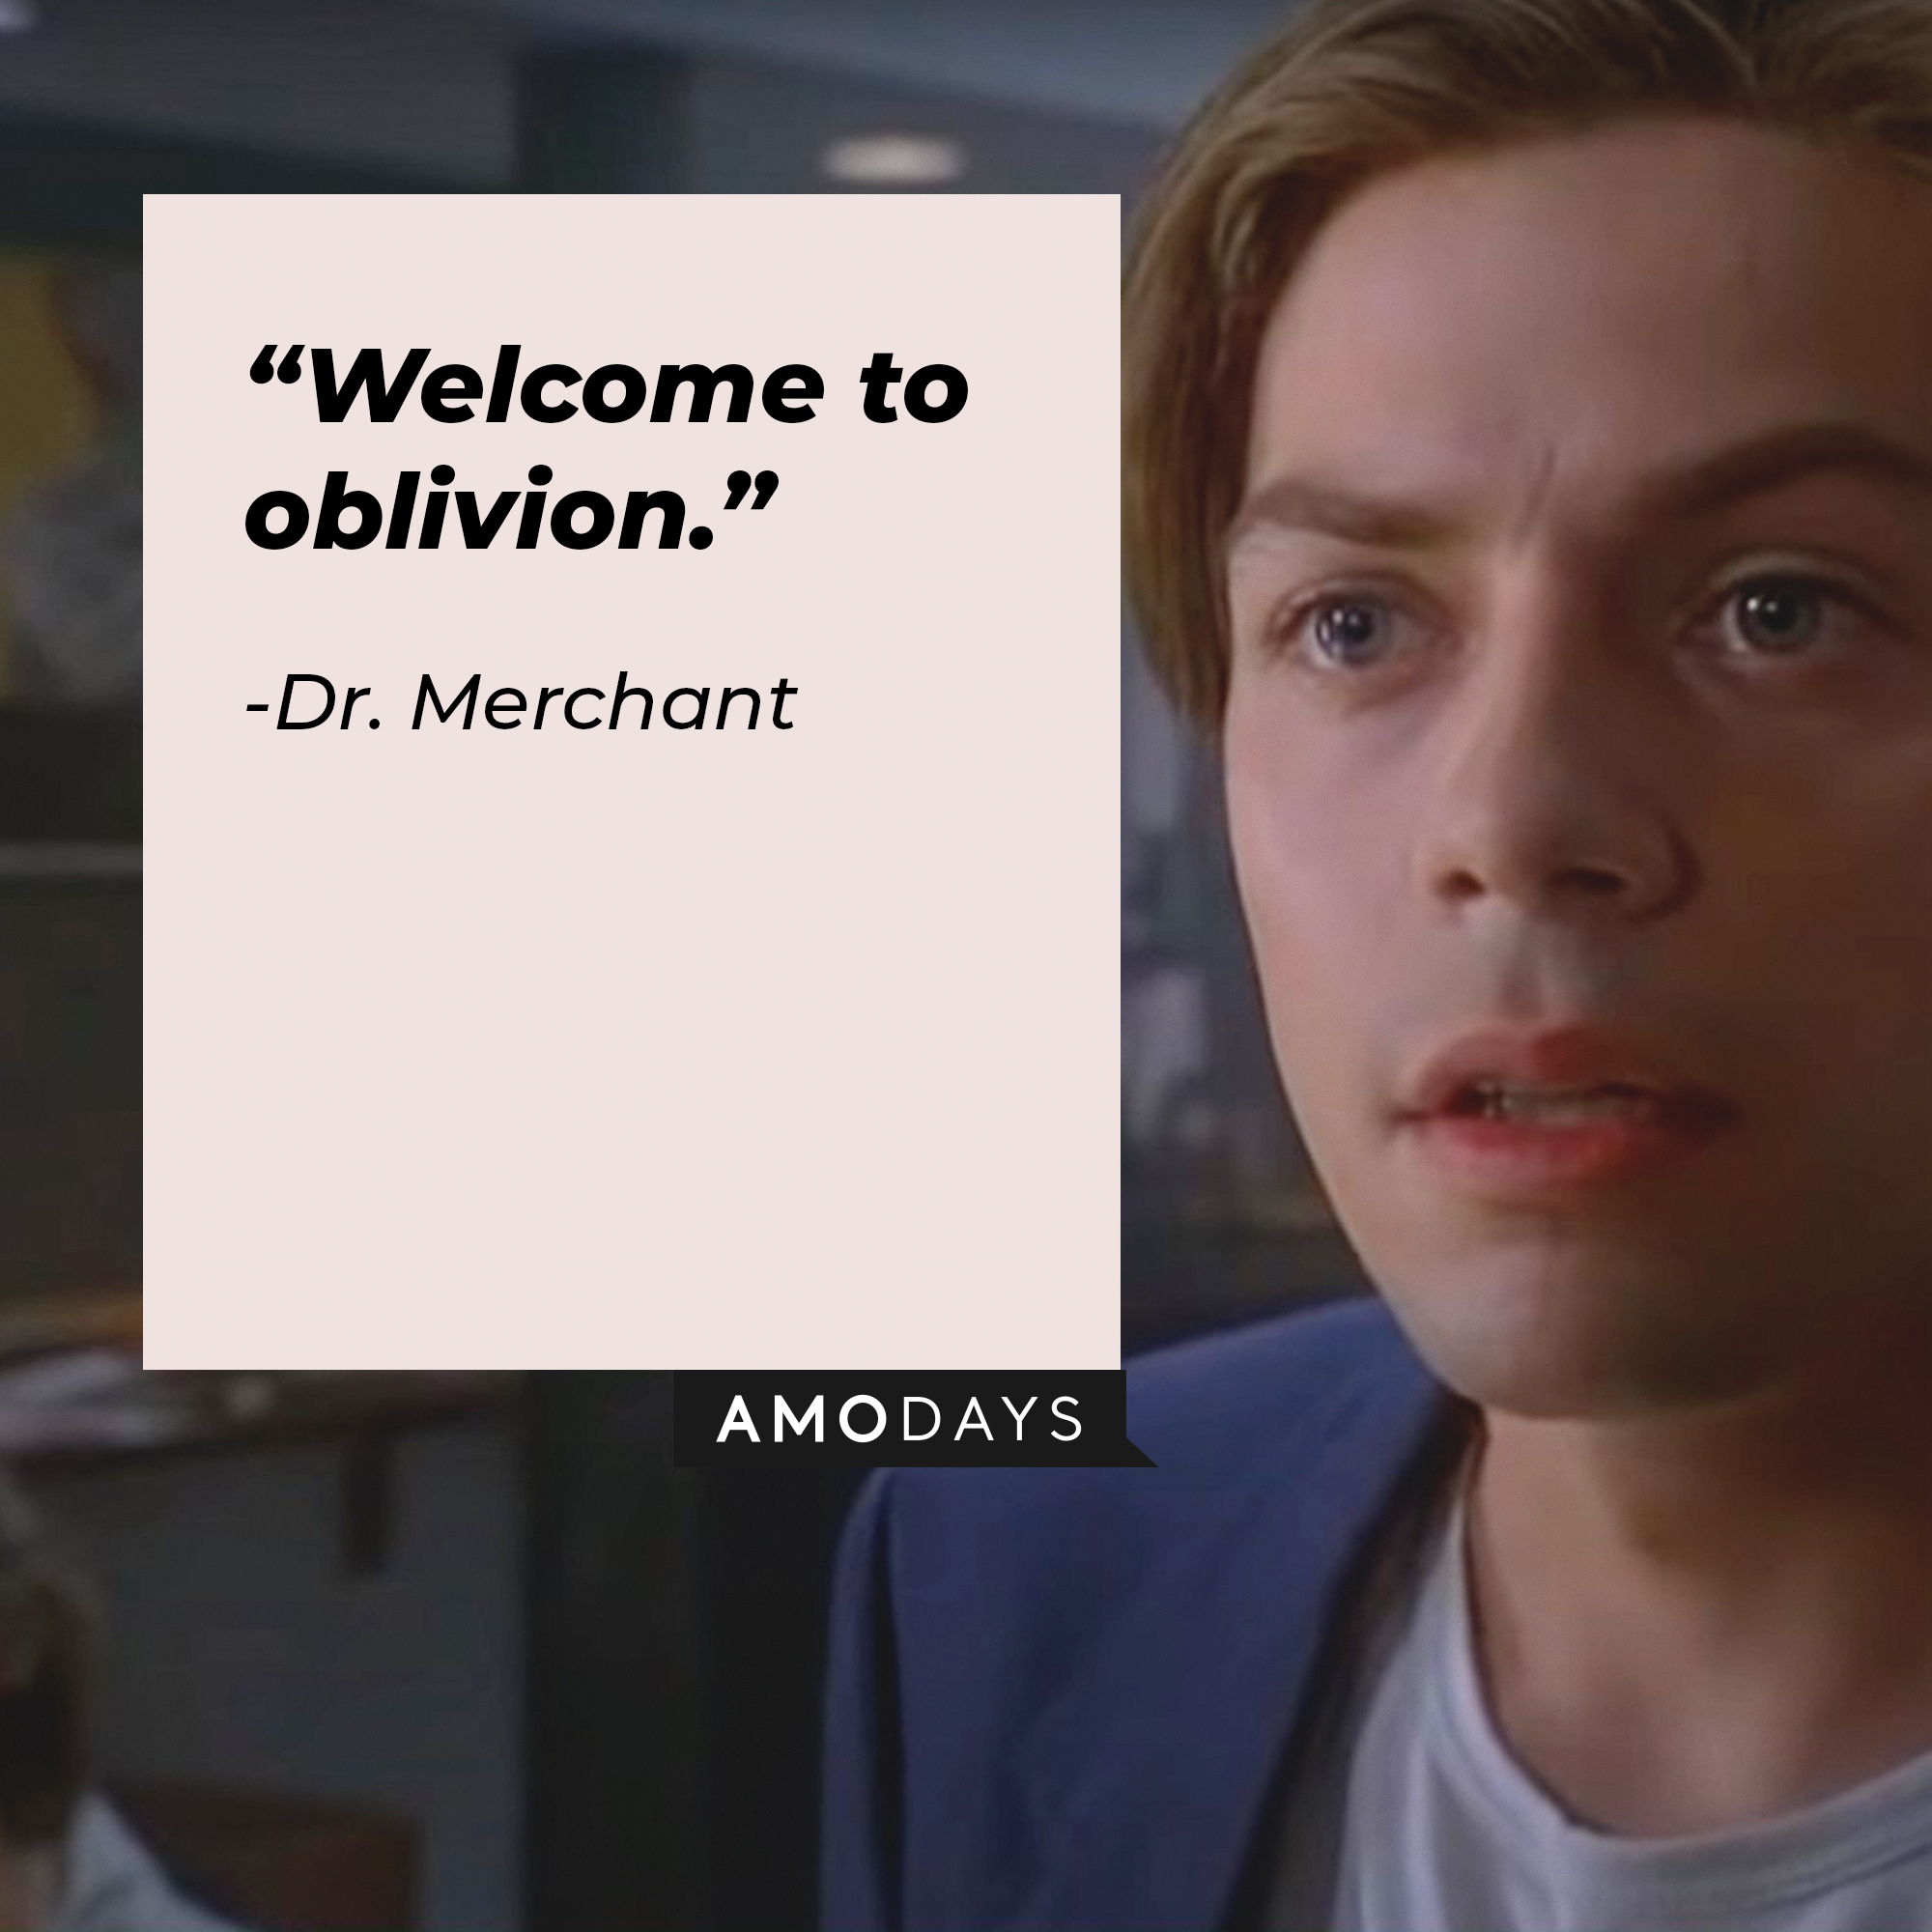 A picture of Dr. Merchant’s from “Hellraiser” with a quote by him that reads, “Welcome to oblivion.” | Image: facebook.com/HellraiserMovies